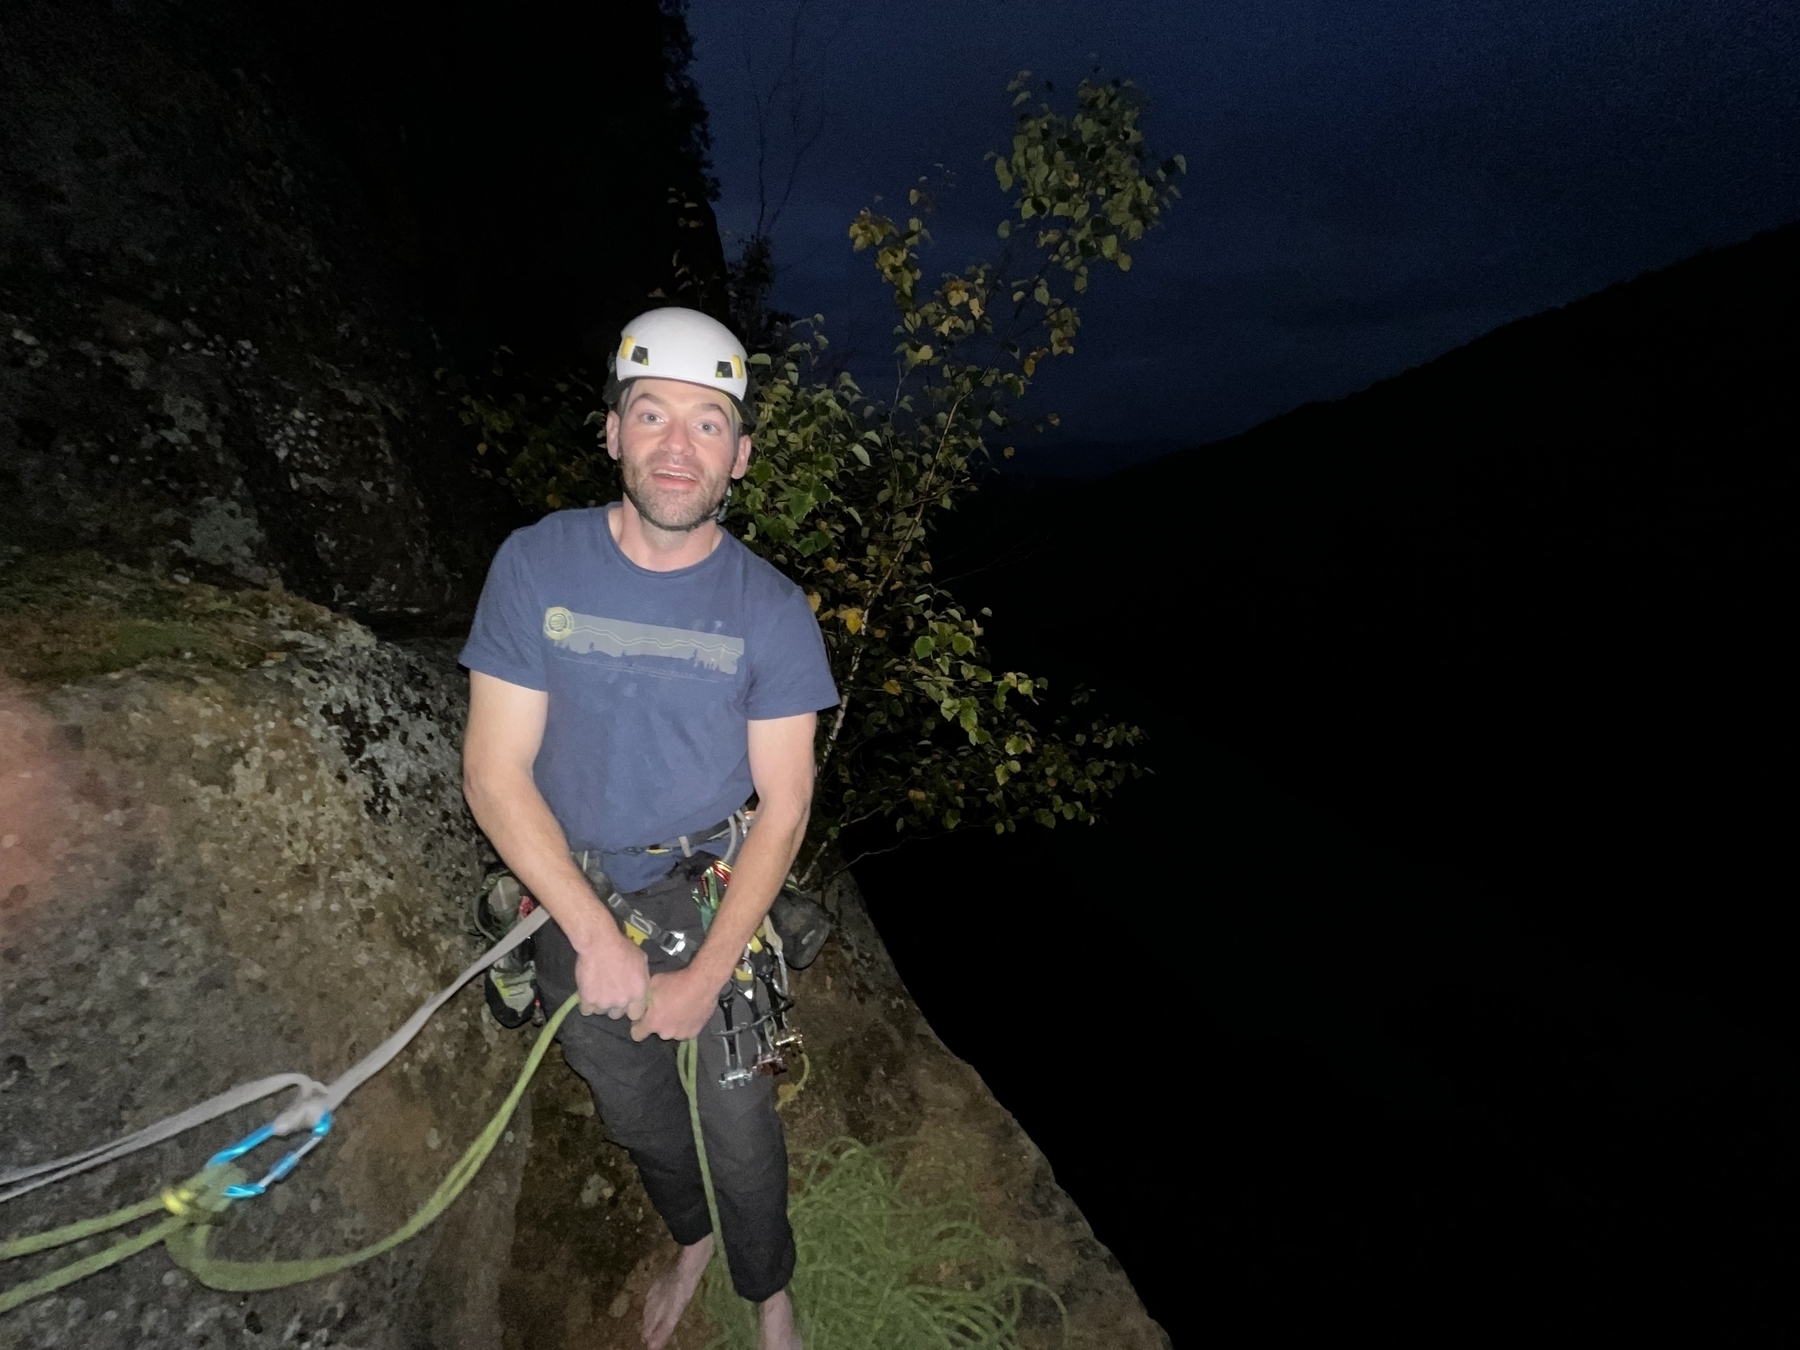 Flash photo of climber at the top of a cliff at night.